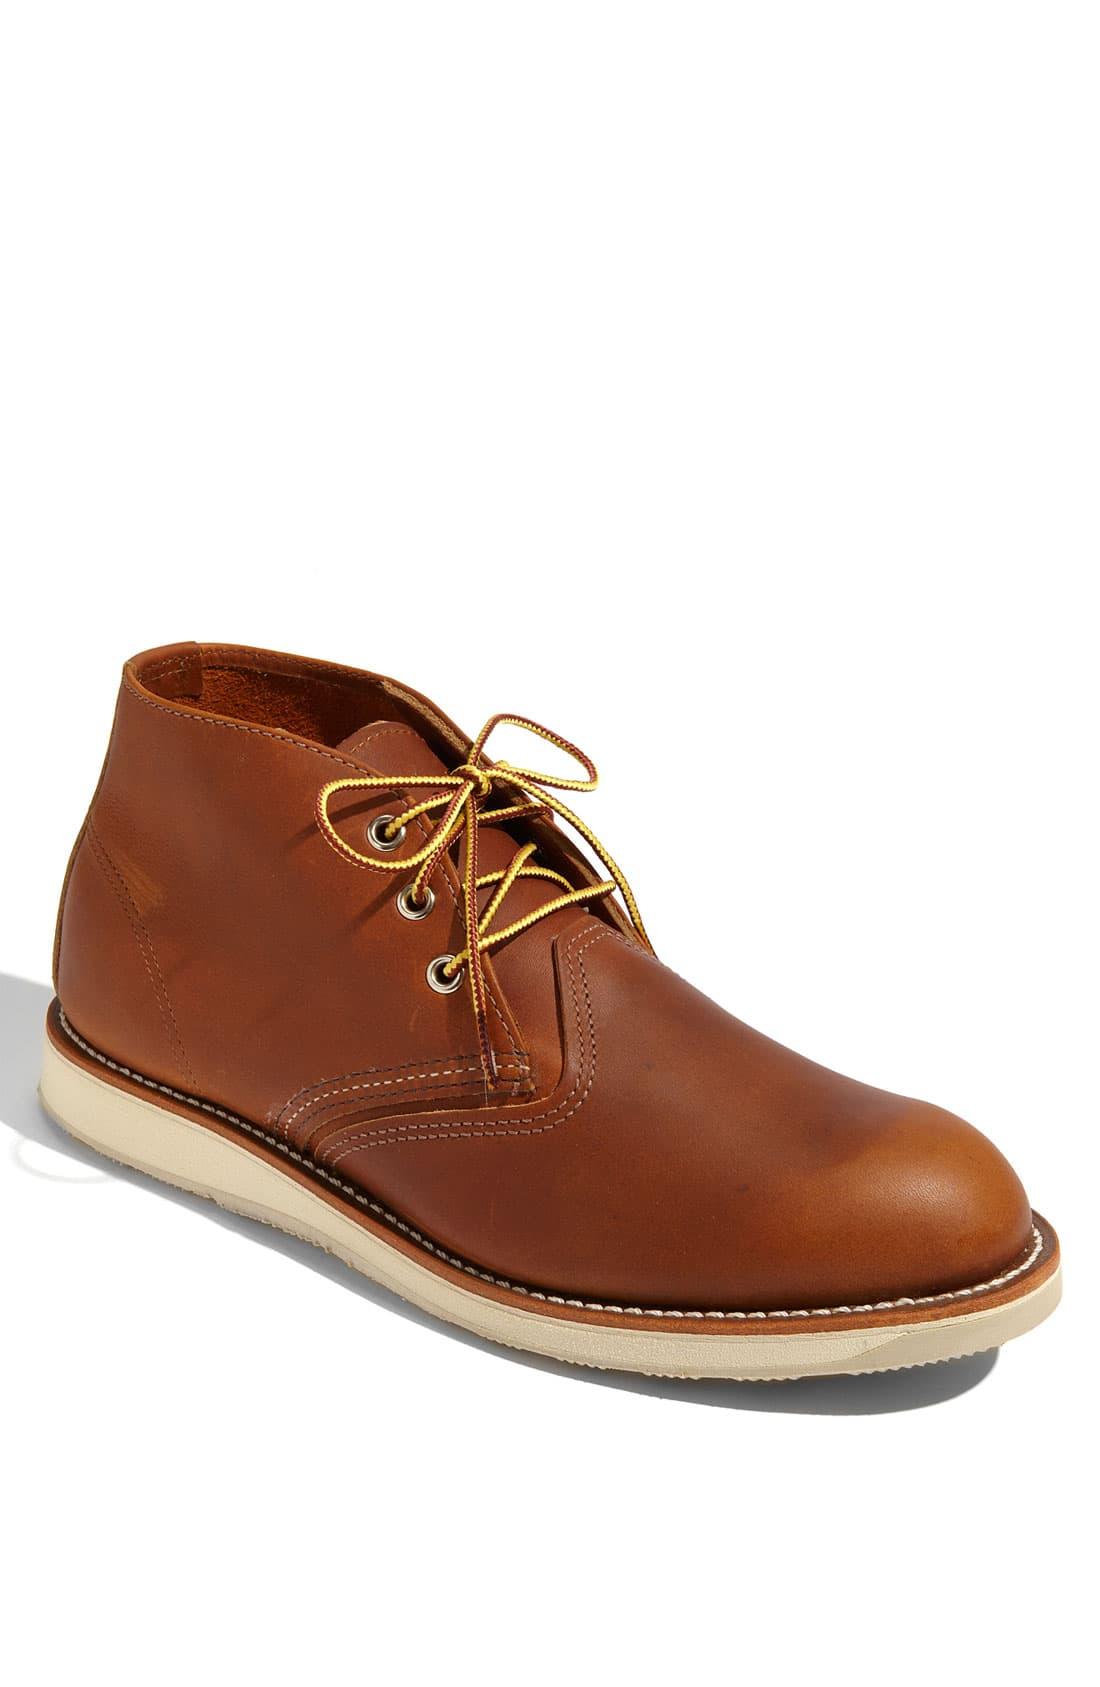 Red Wing 3140 Work Chukka Oro-iginal in Brown for Men - Lyst